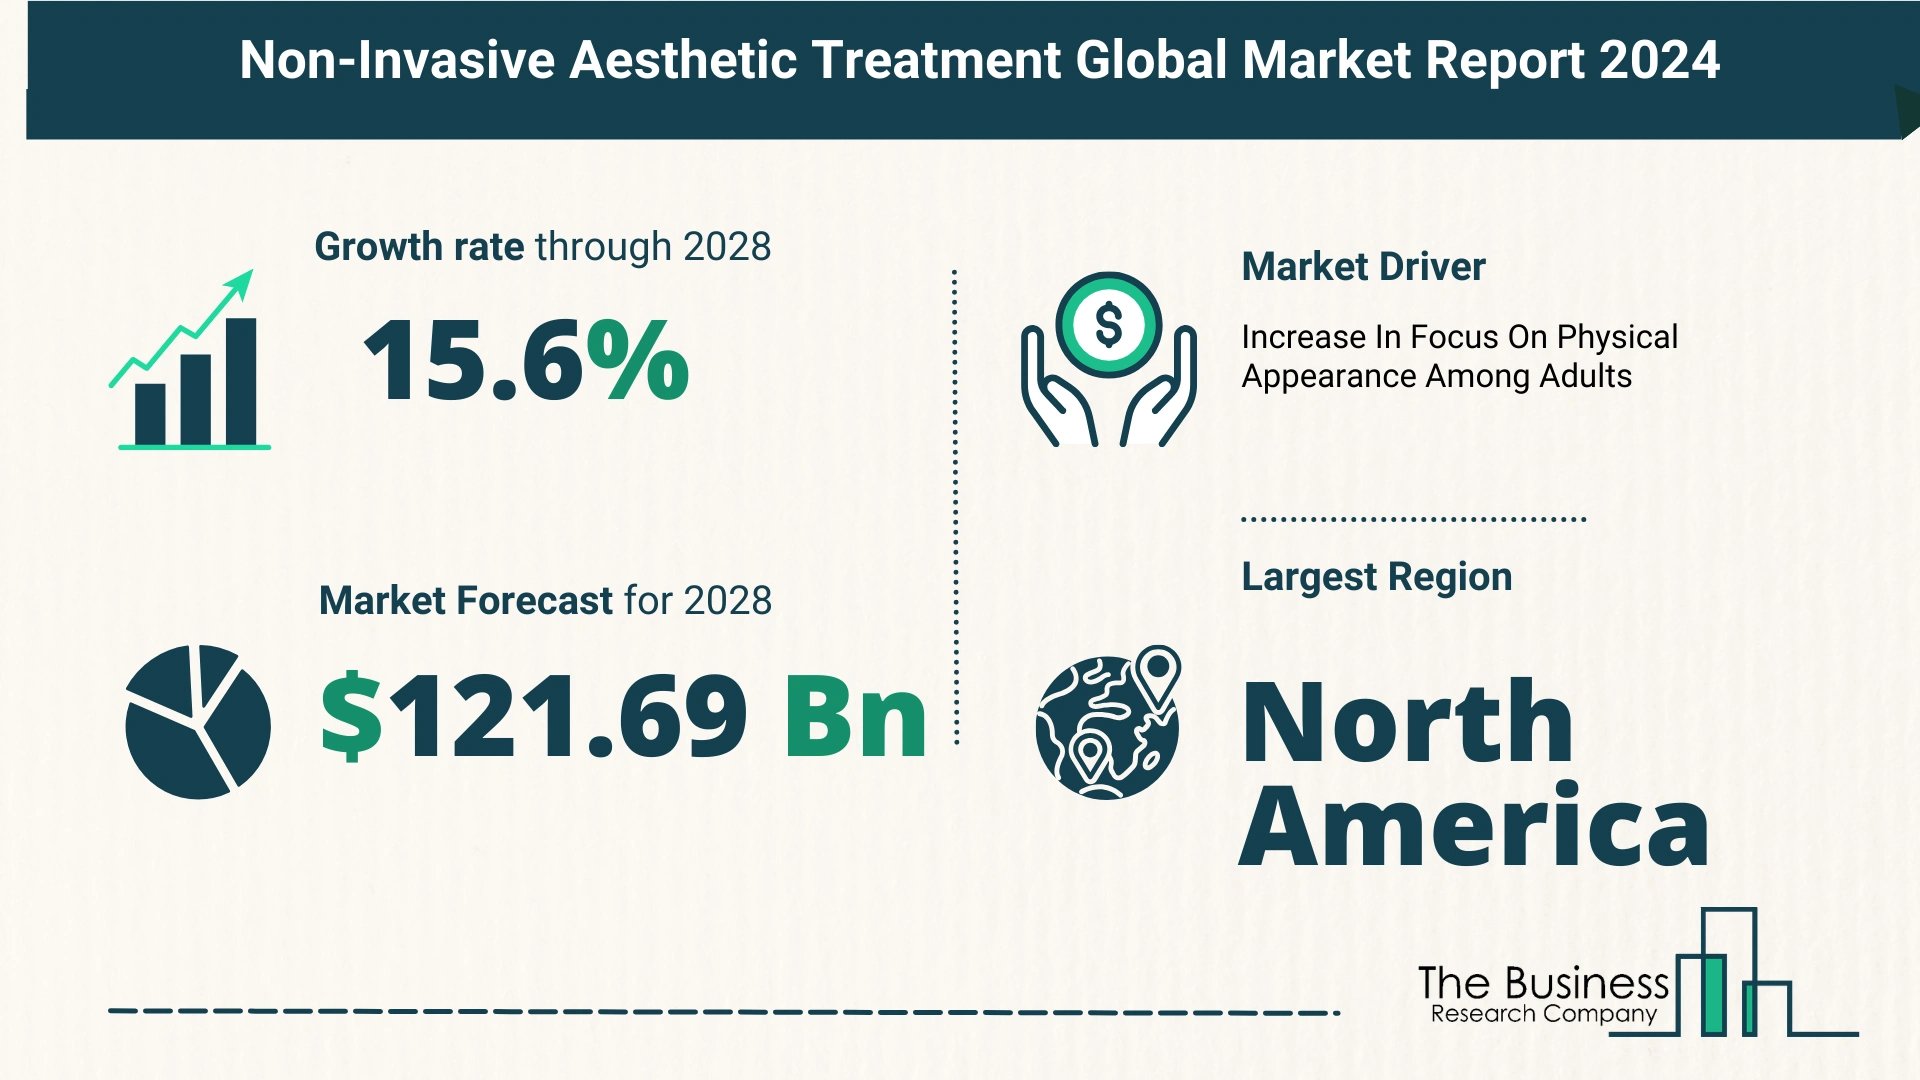 How Is The Non-Invasive Aesthetic Treatment Market Expected To Grow Through 2024-2033